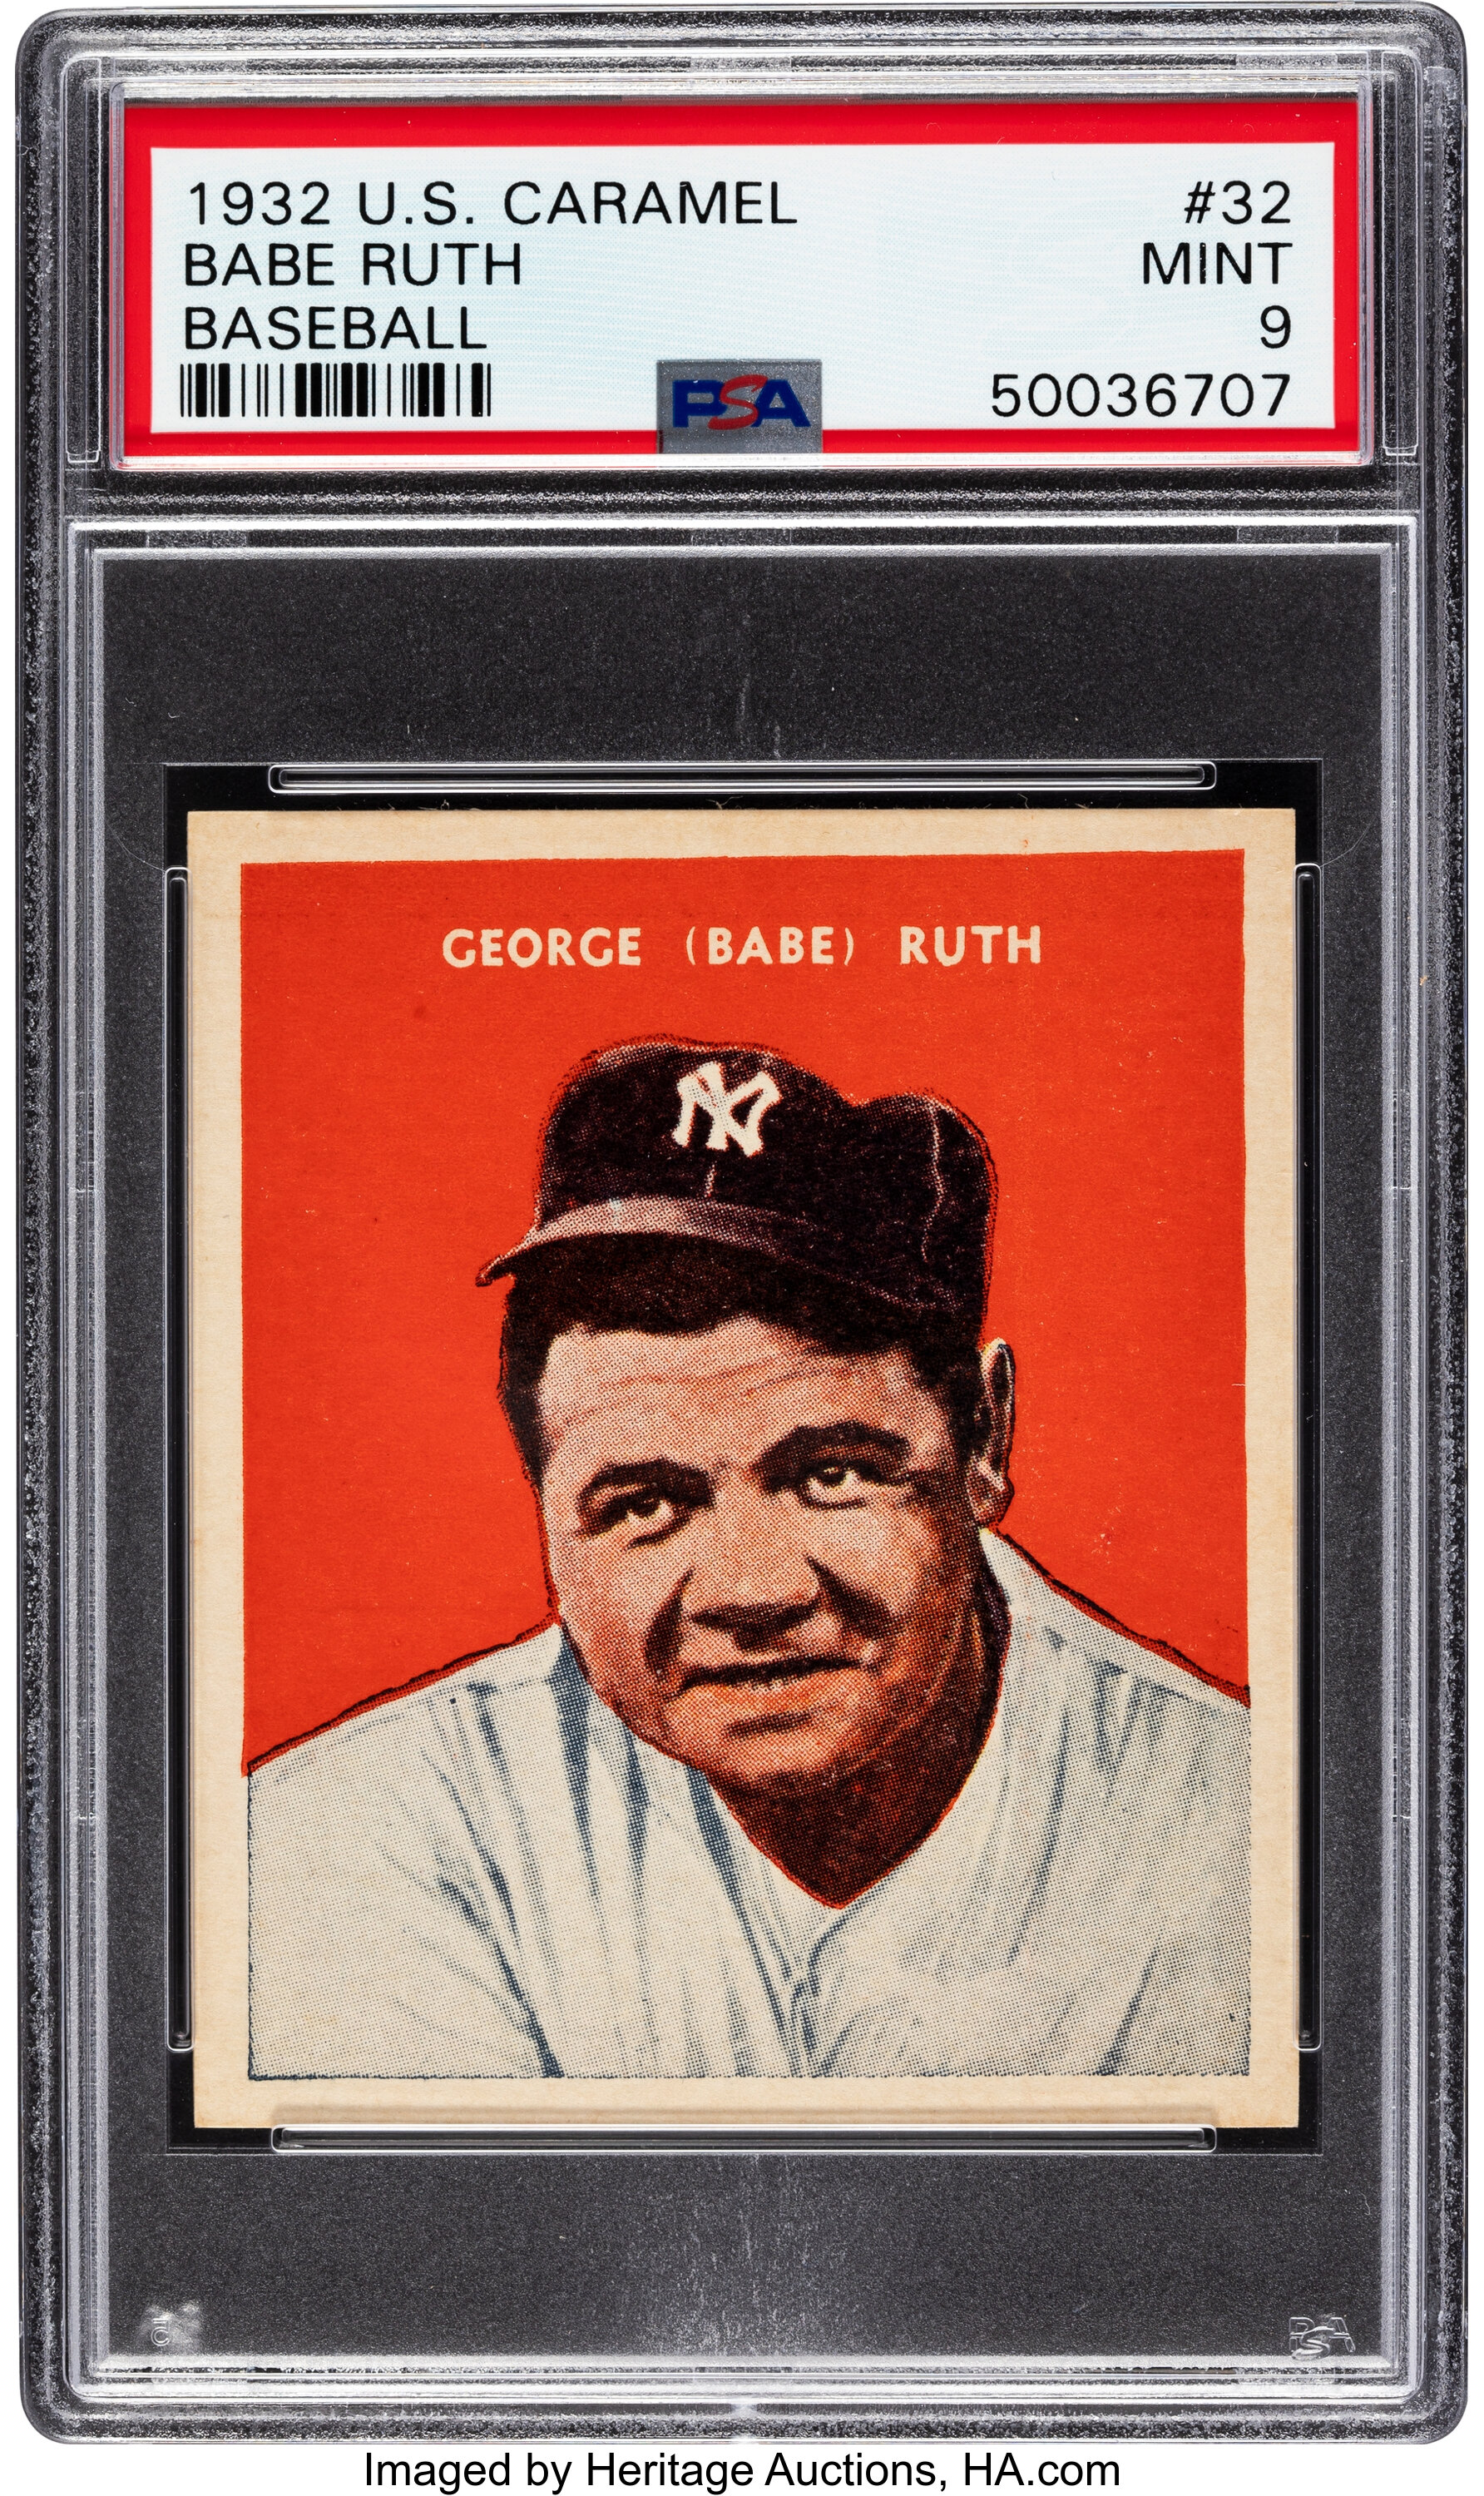 A Picture's Worth 1,000 Wordsand $11,000 : The Price of a Babe Ruth